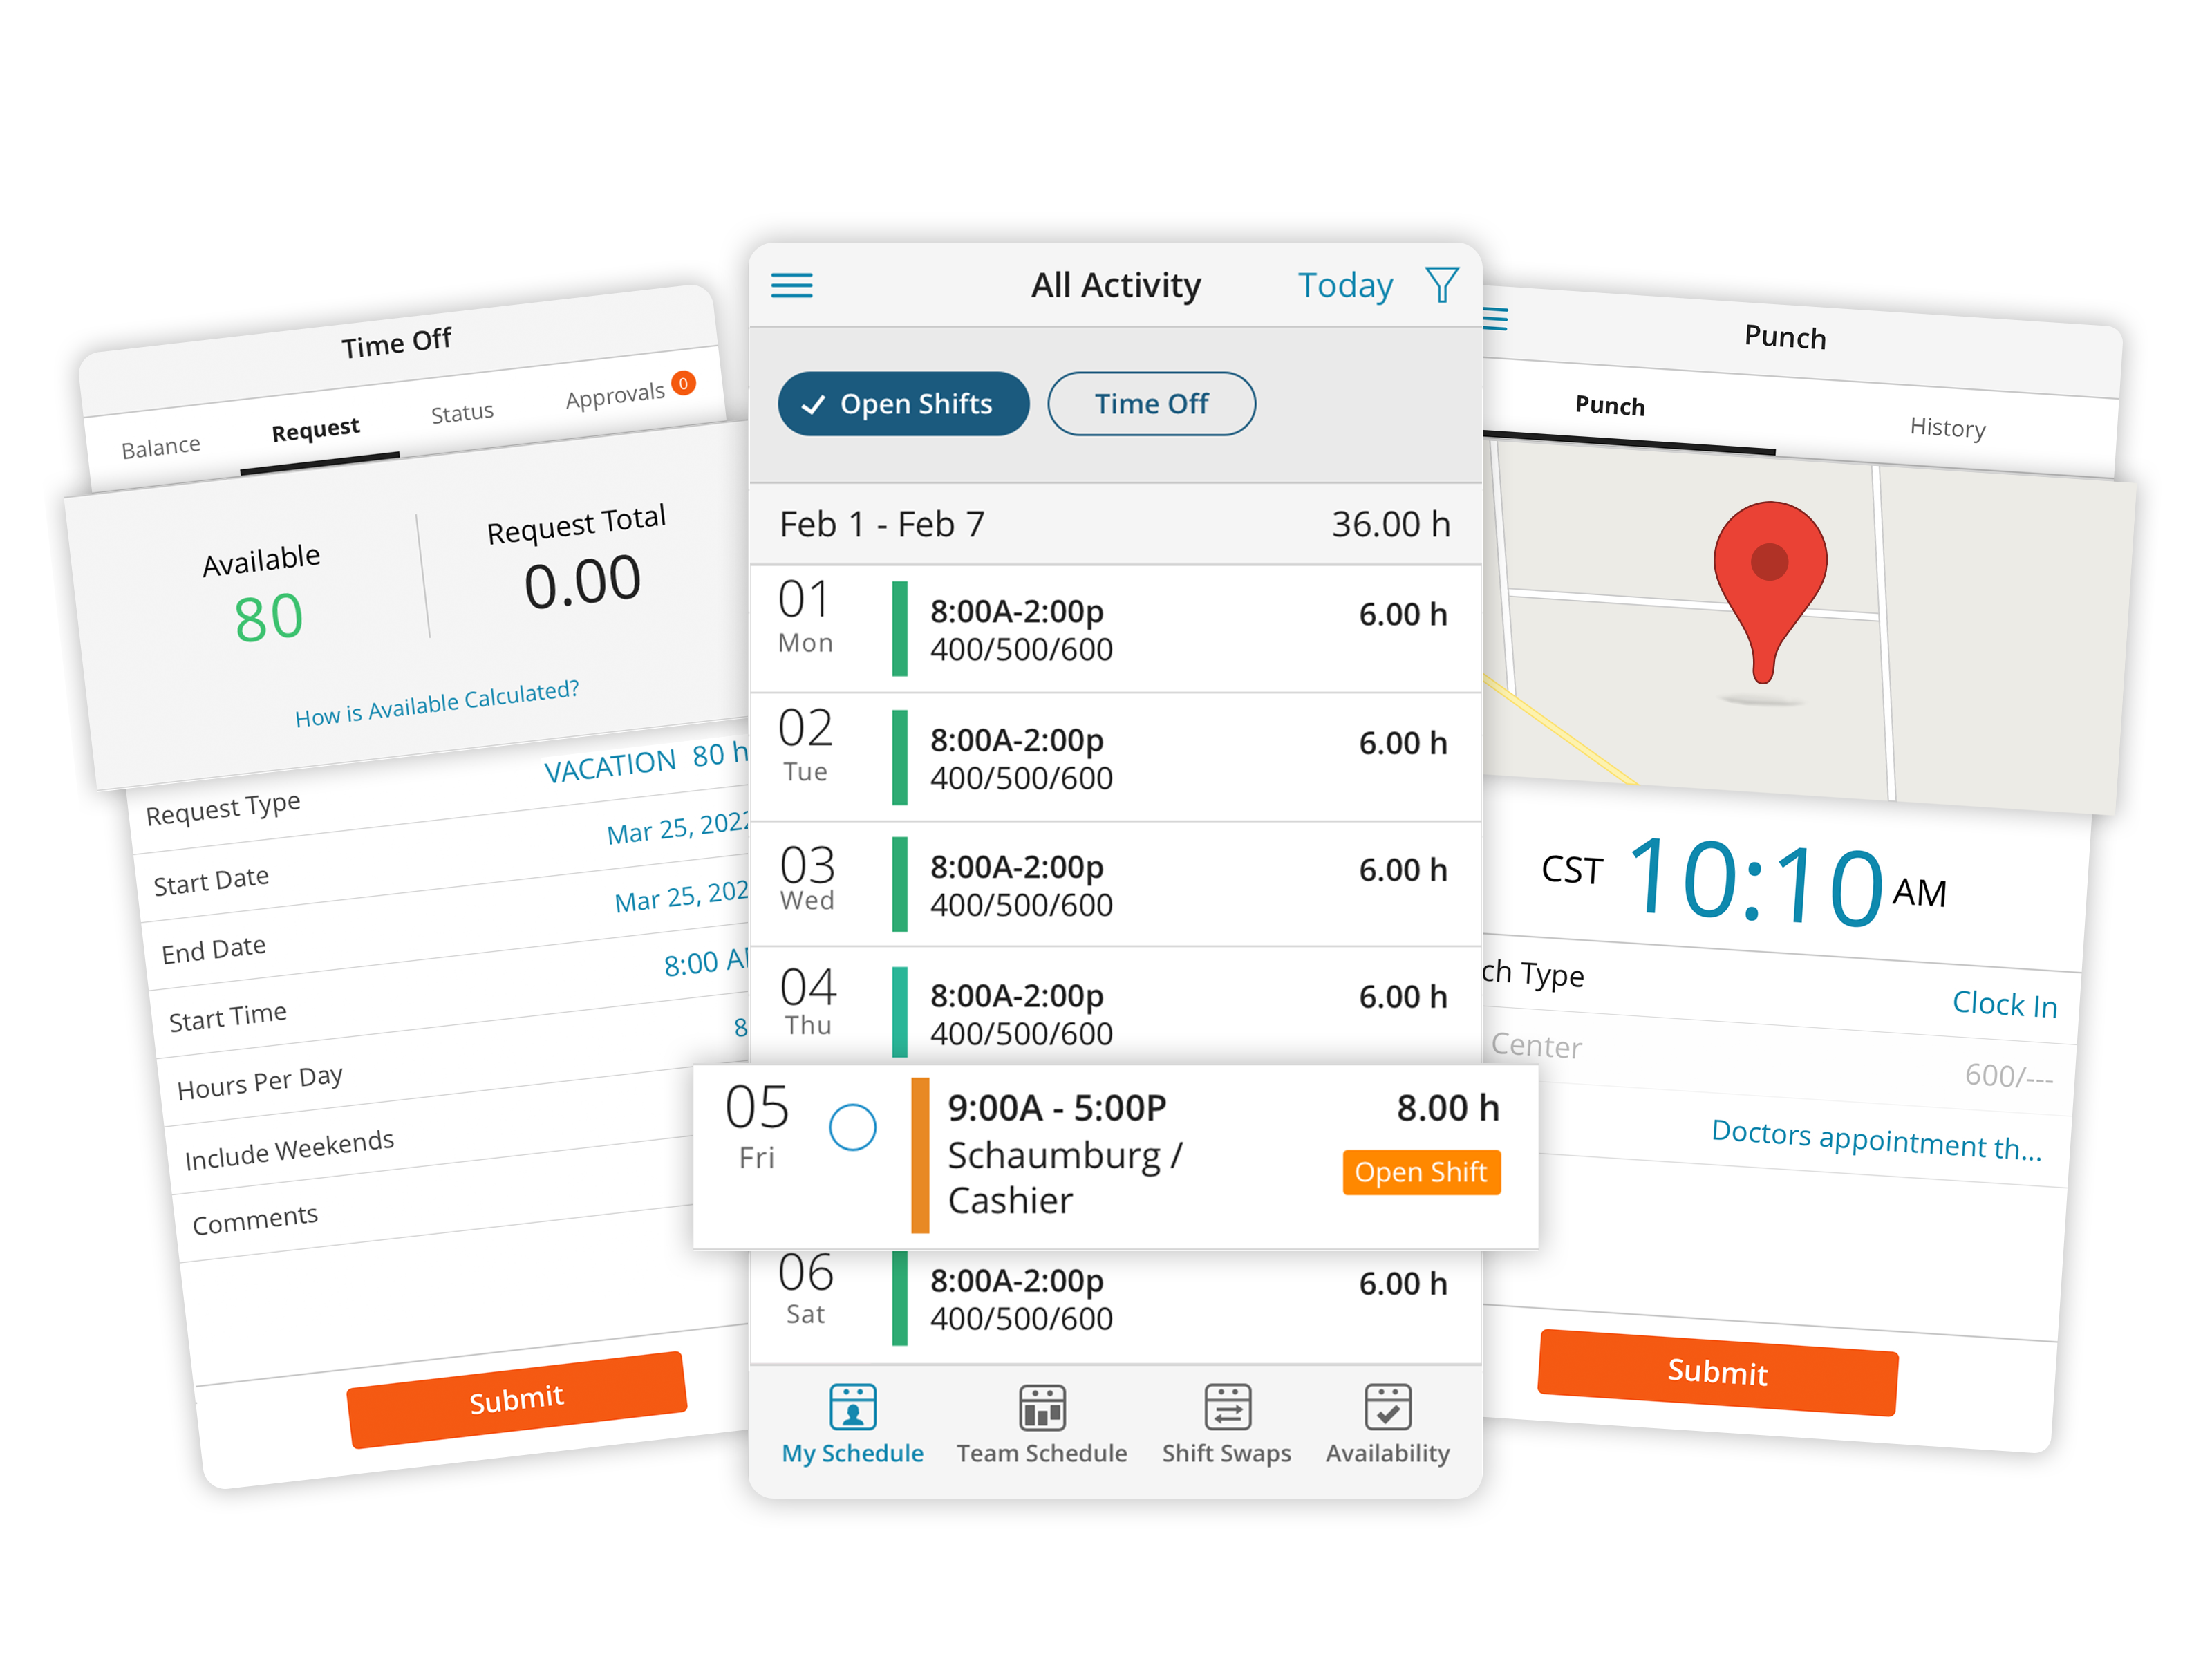 Paylocity Software - Our Workforce Management tool helps get you out of juggling spreadsheets, bulletin boards, and multiple emails. Eliminate unplanned labor costs, minimize compliance risks, and deliver a mobile and connected experience for on-the-go managers and employee